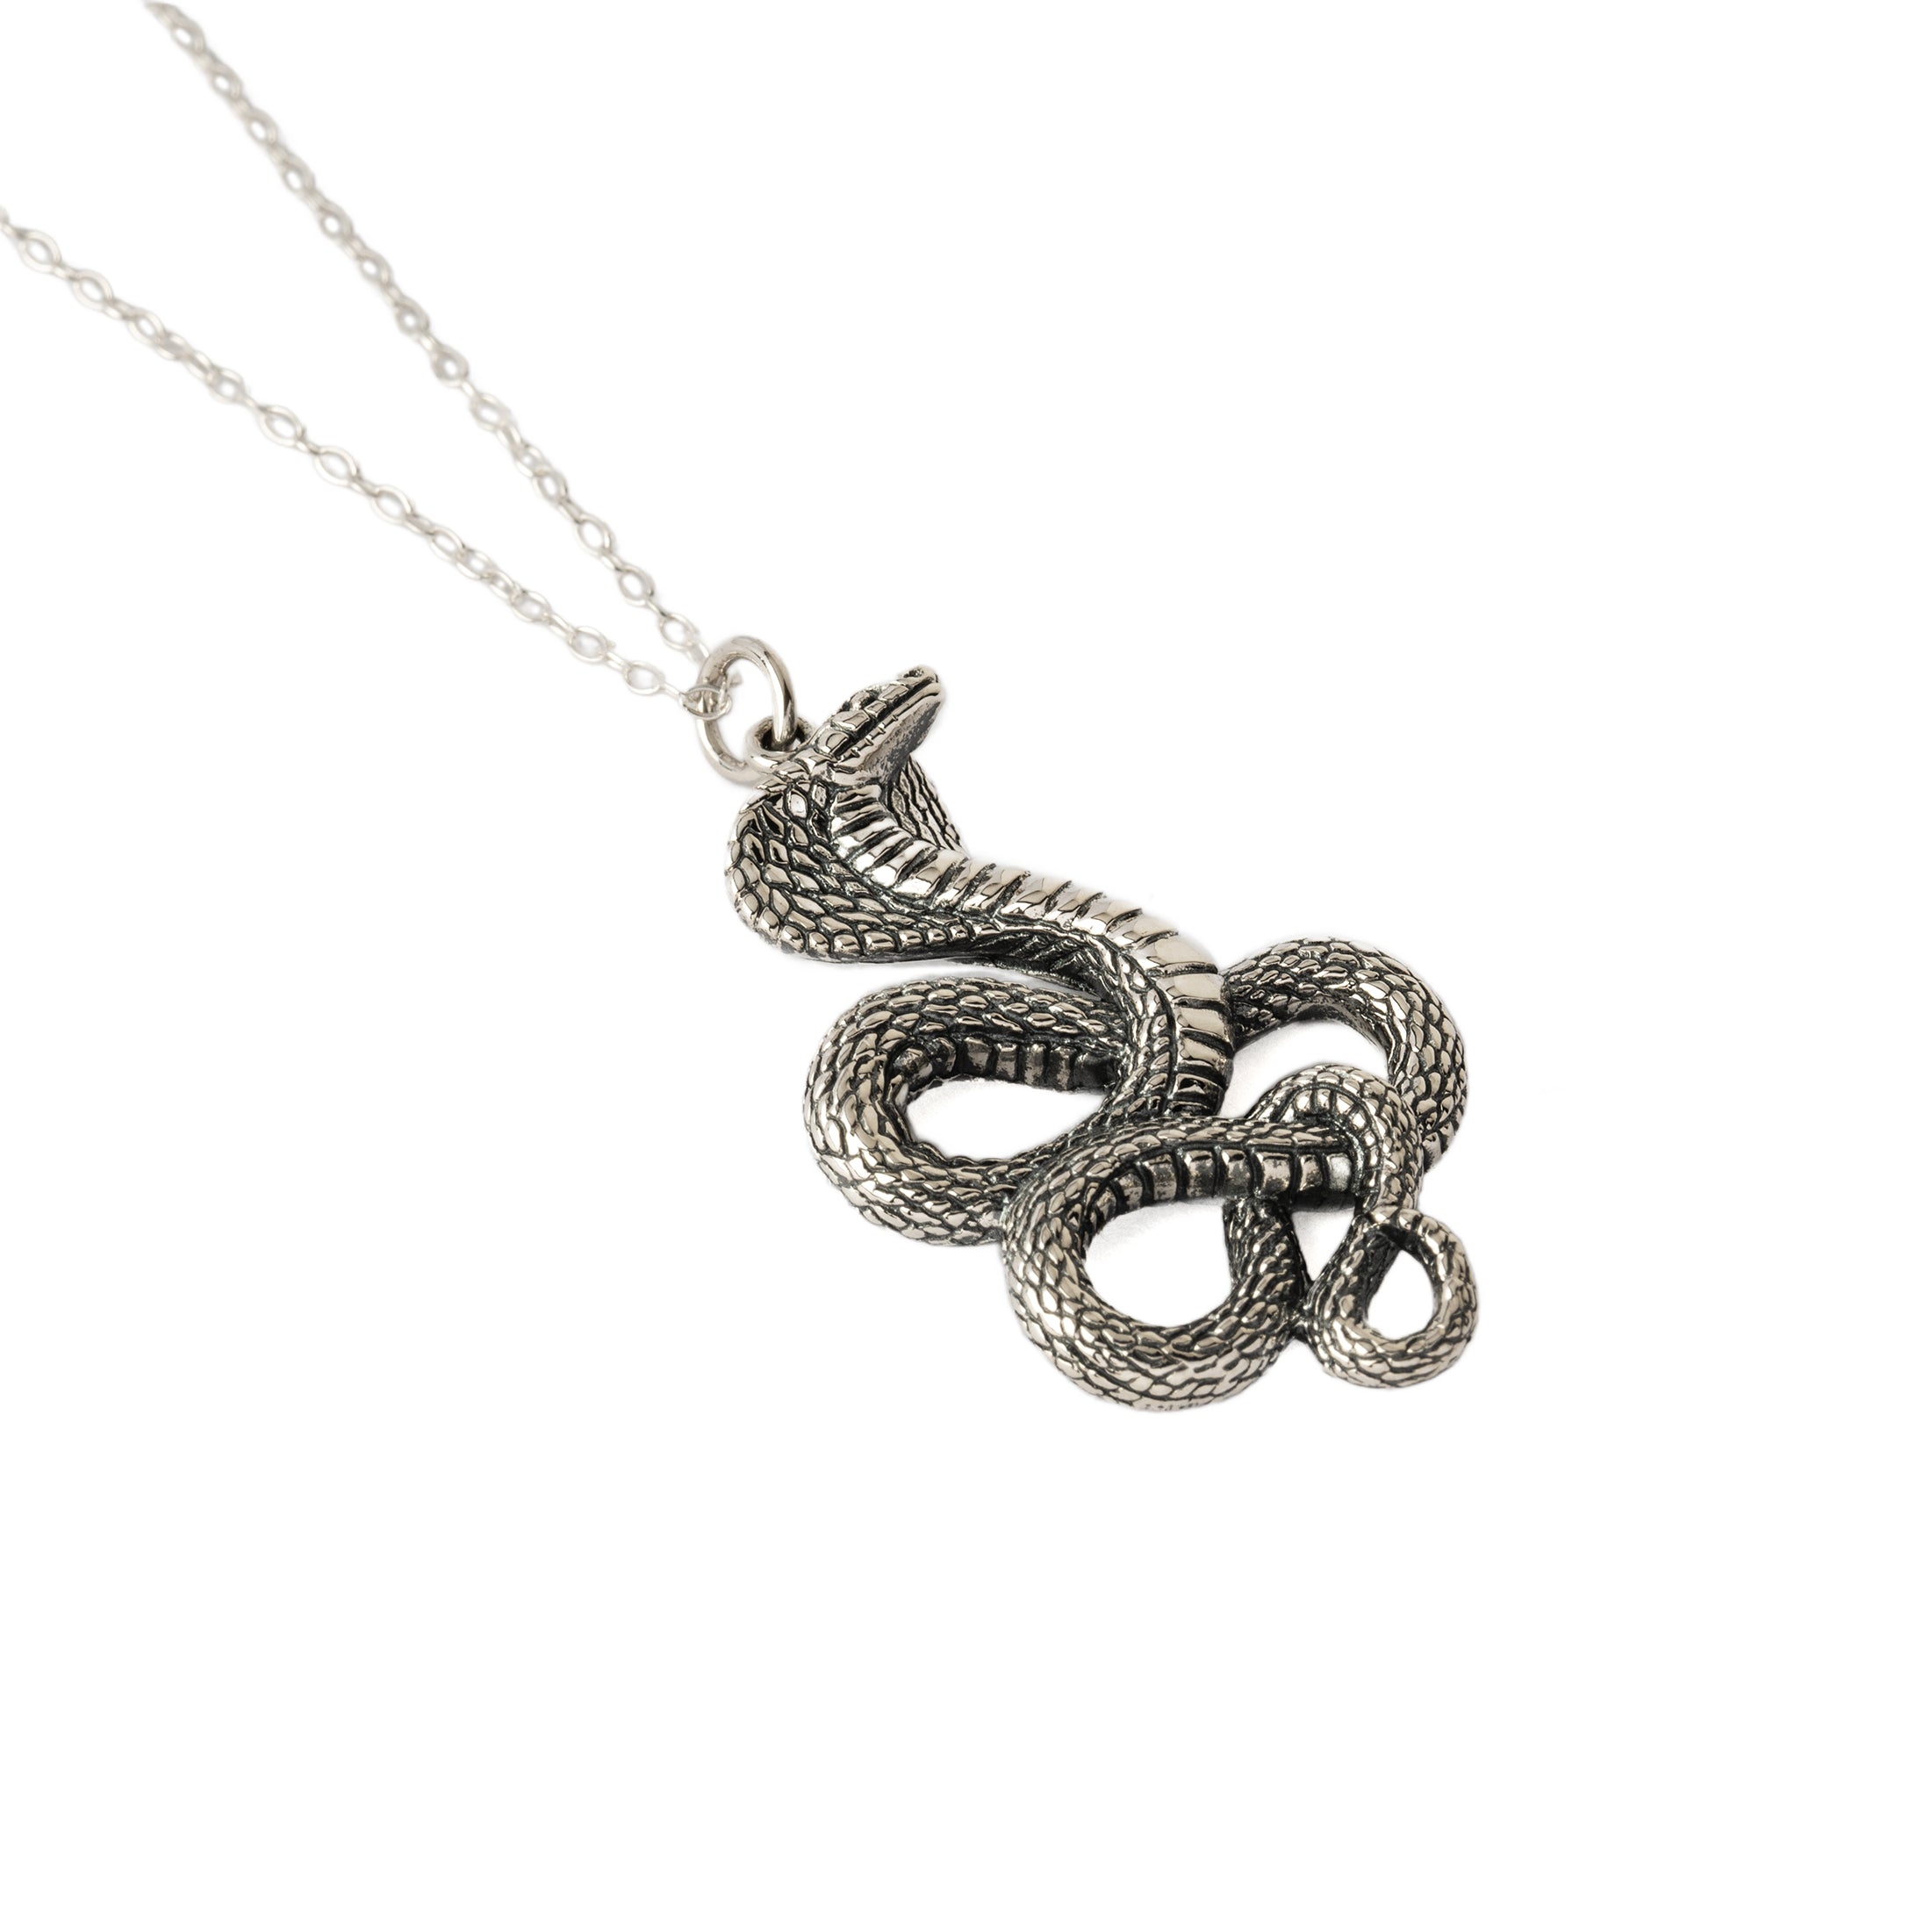 Cobra Silver Necklace left side view